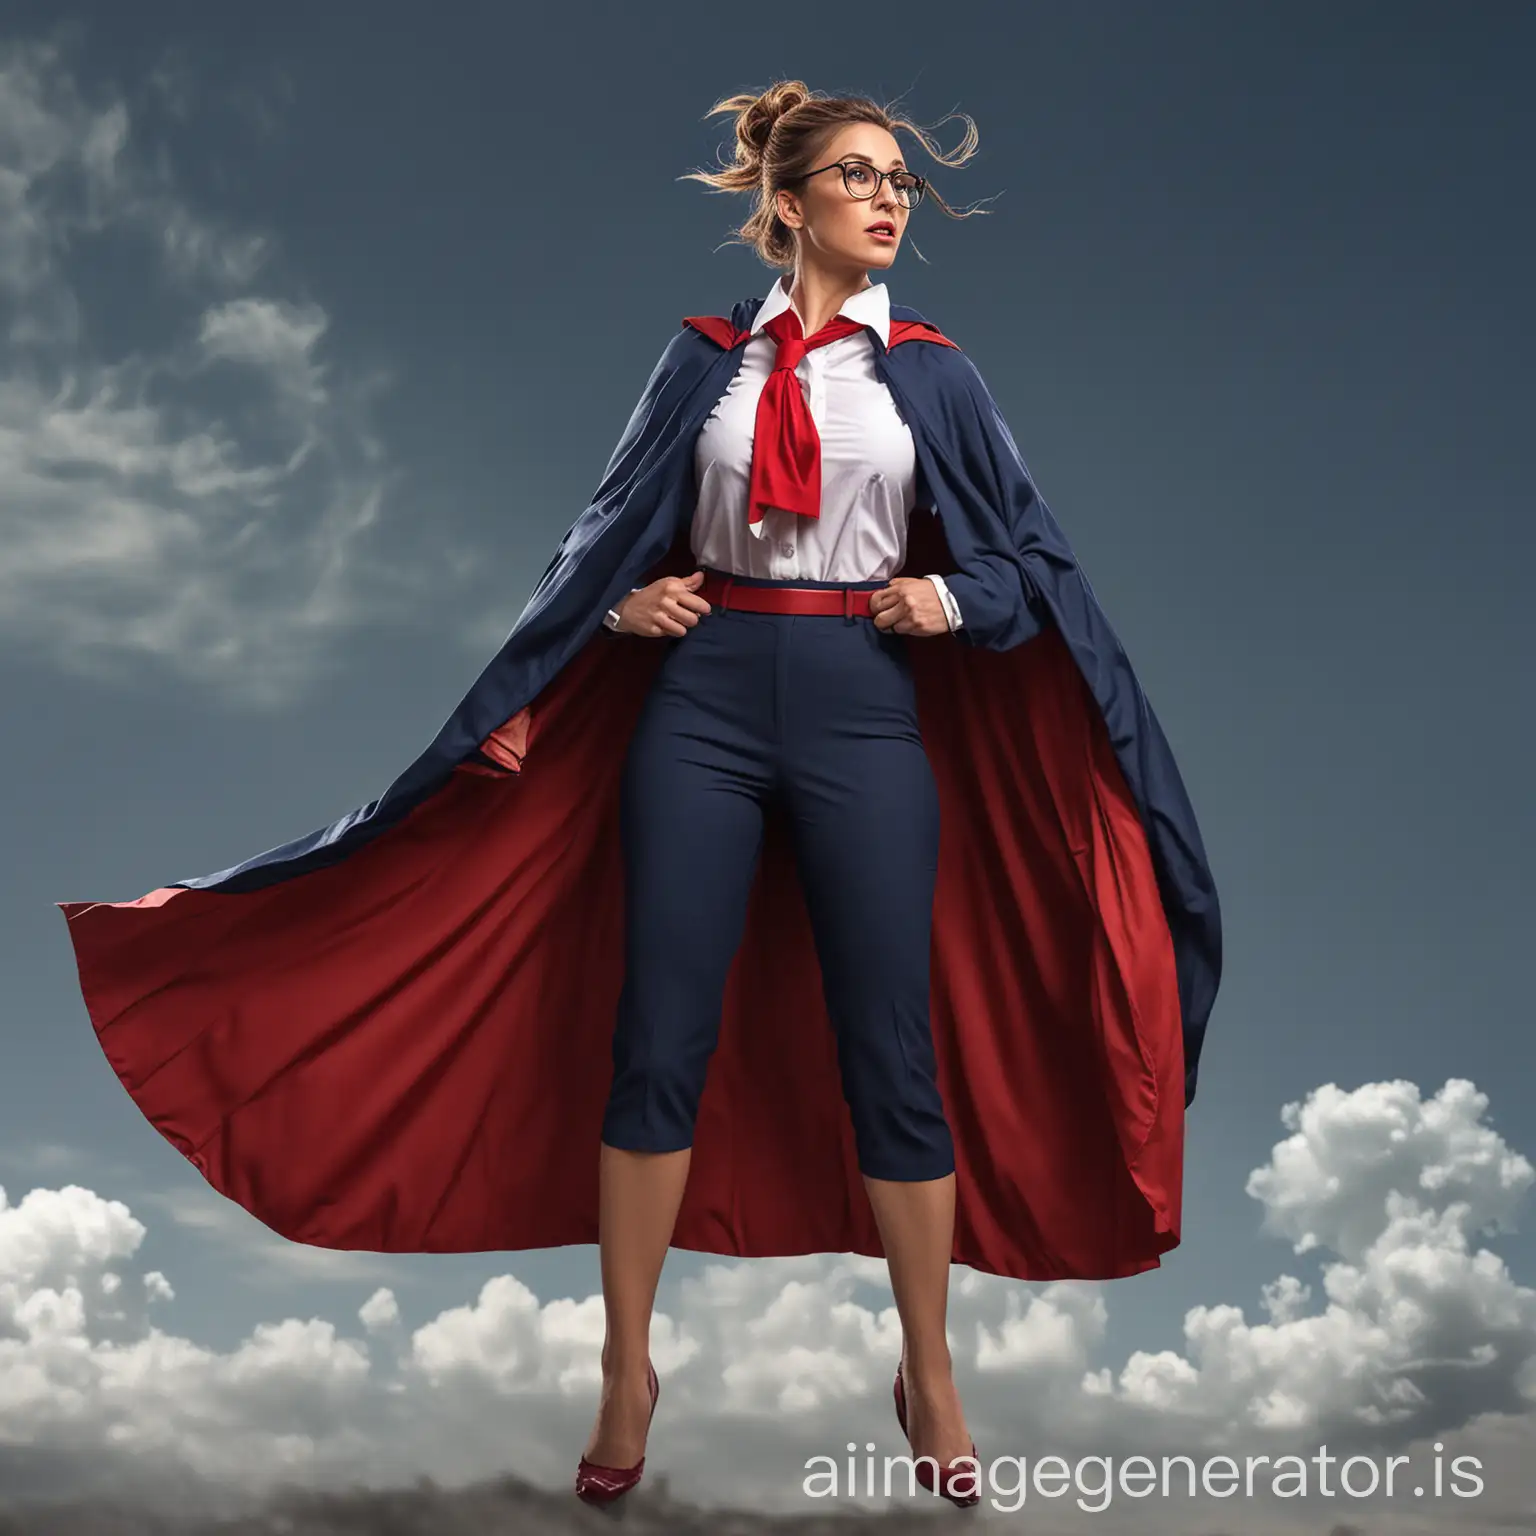 woman superhero standing. facing the camera. hair in a bun. wears glasses. fists on hips, chin up, confident pose.  wearing a dark blue business suit with a white blouse. with ankle-length red cape waving behind her in the wind.